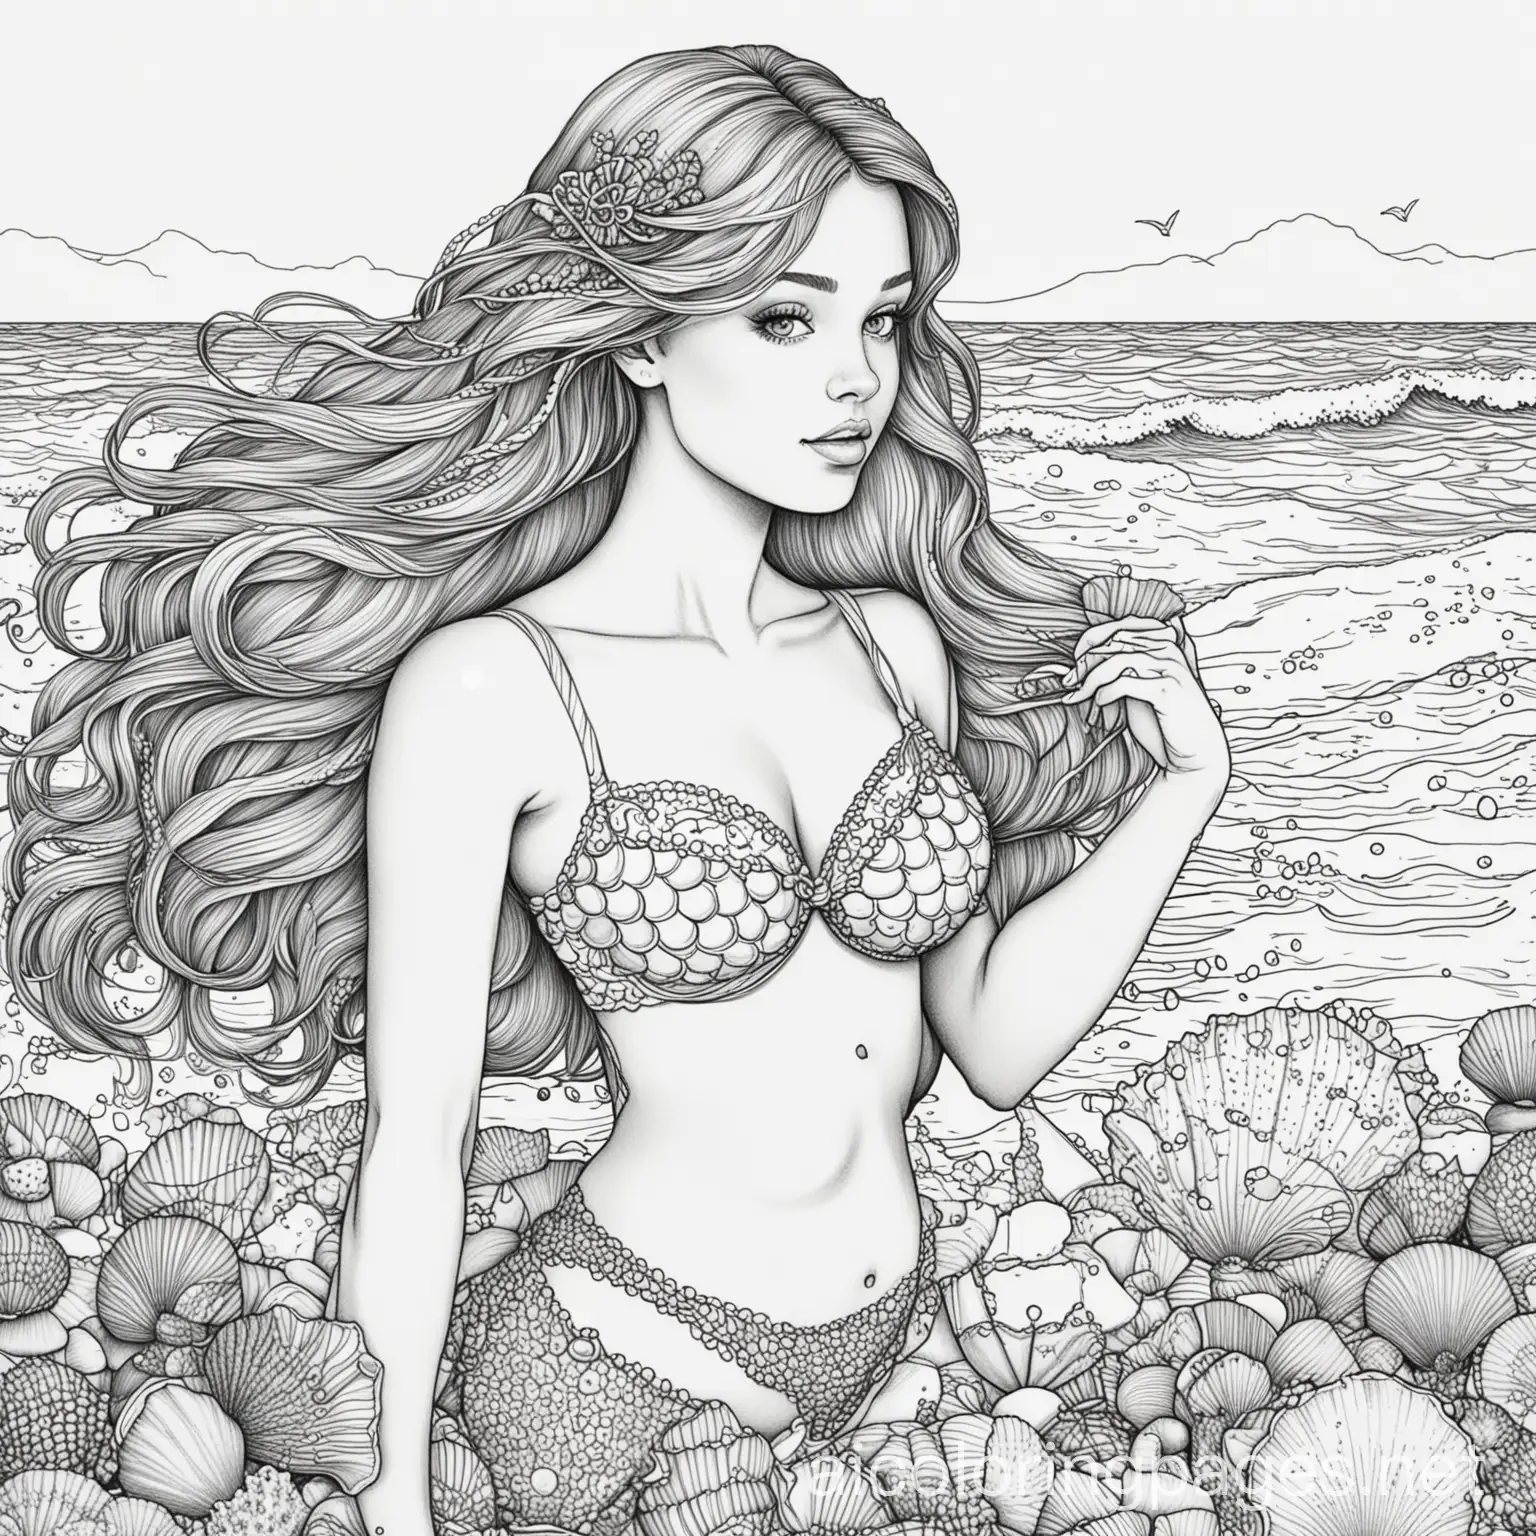 Mermaid Next beach full of seashells wearing claim shell bra, Coloring Page, black and white, line art, white background, Simplicity, Ample White Space. The background of the coloring page is plain white to make it easy for young children to color within the lines. The outlines of all the subjects are easy to distinguish, making it simple for kids to color without too much difficulty